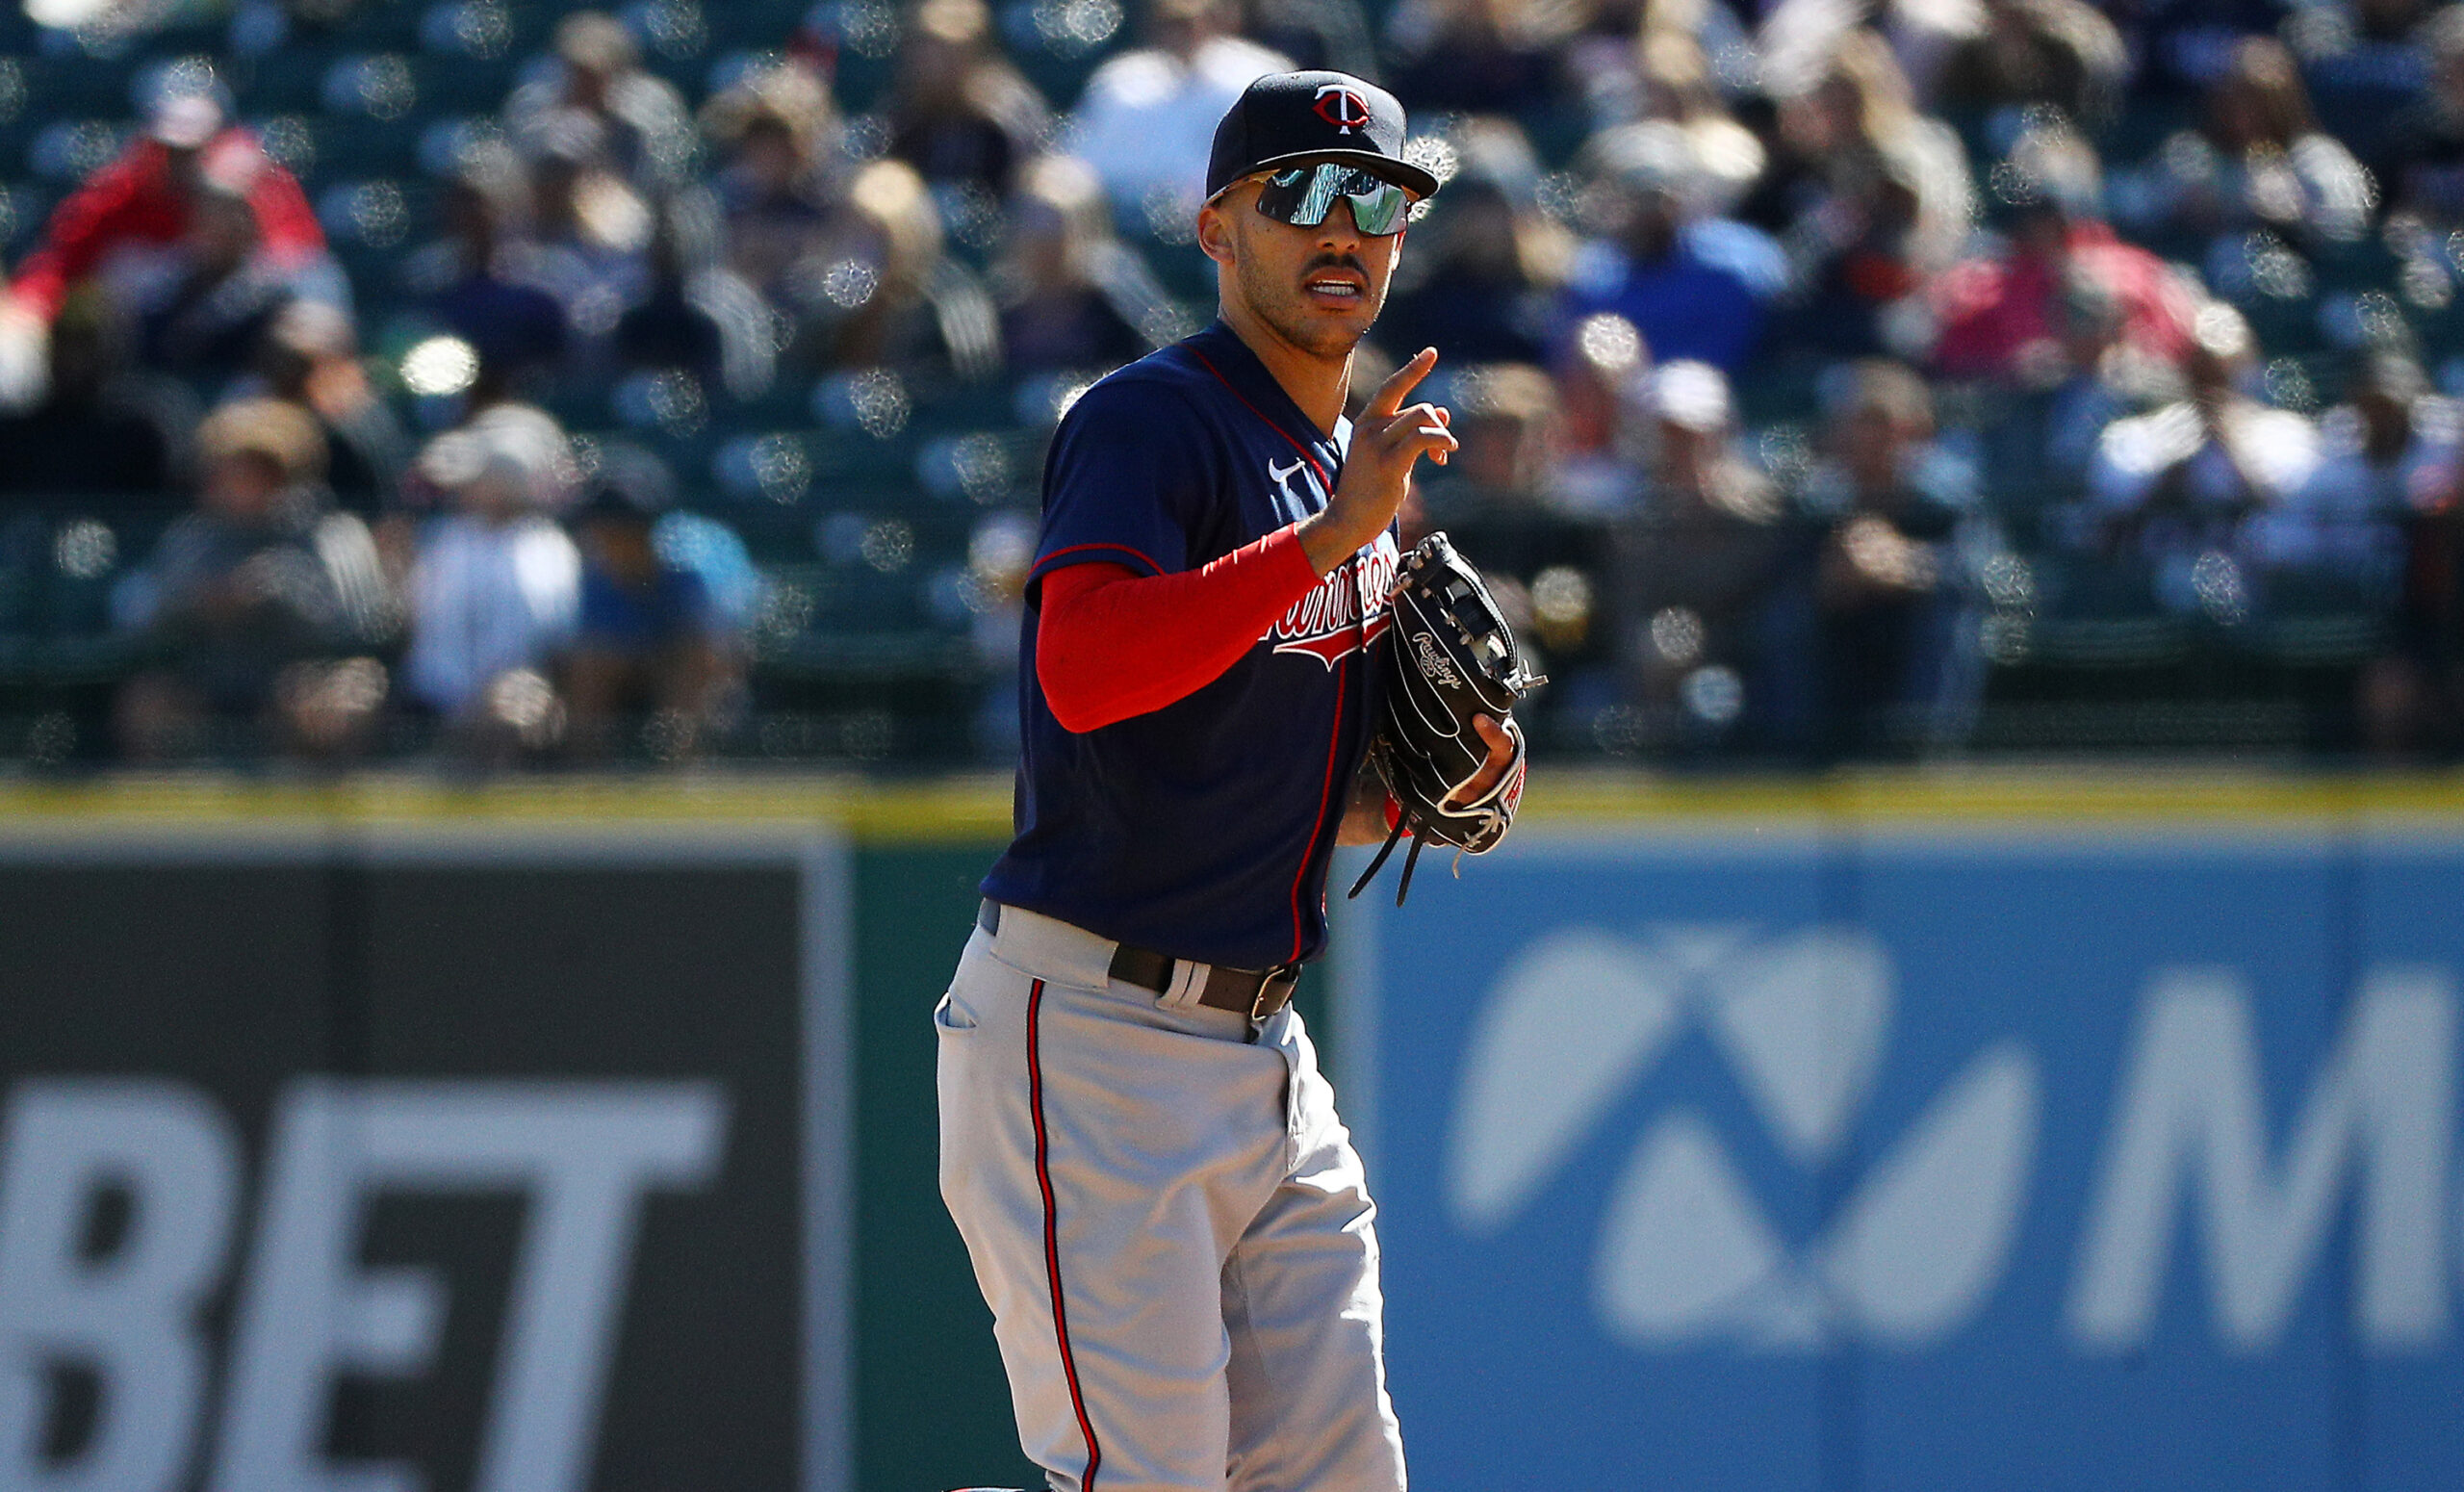 Mets sign SS Carlos Correa hours after deal with Giants falls